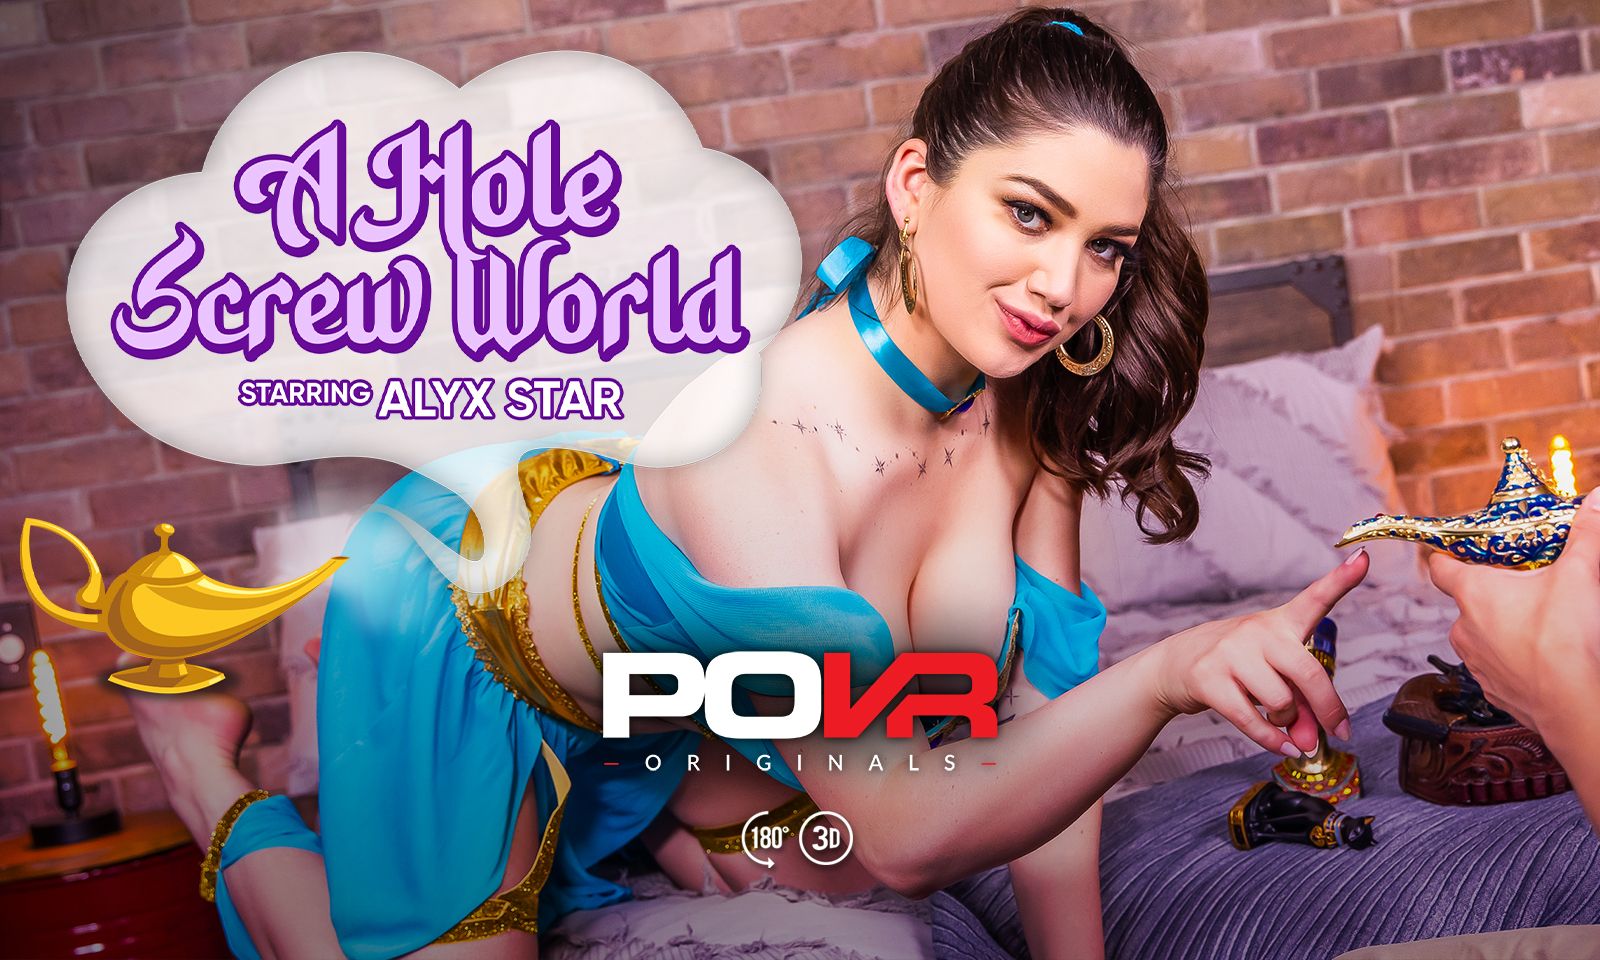 Alyx Star Featured in POVR's 'A Hole Screw World'